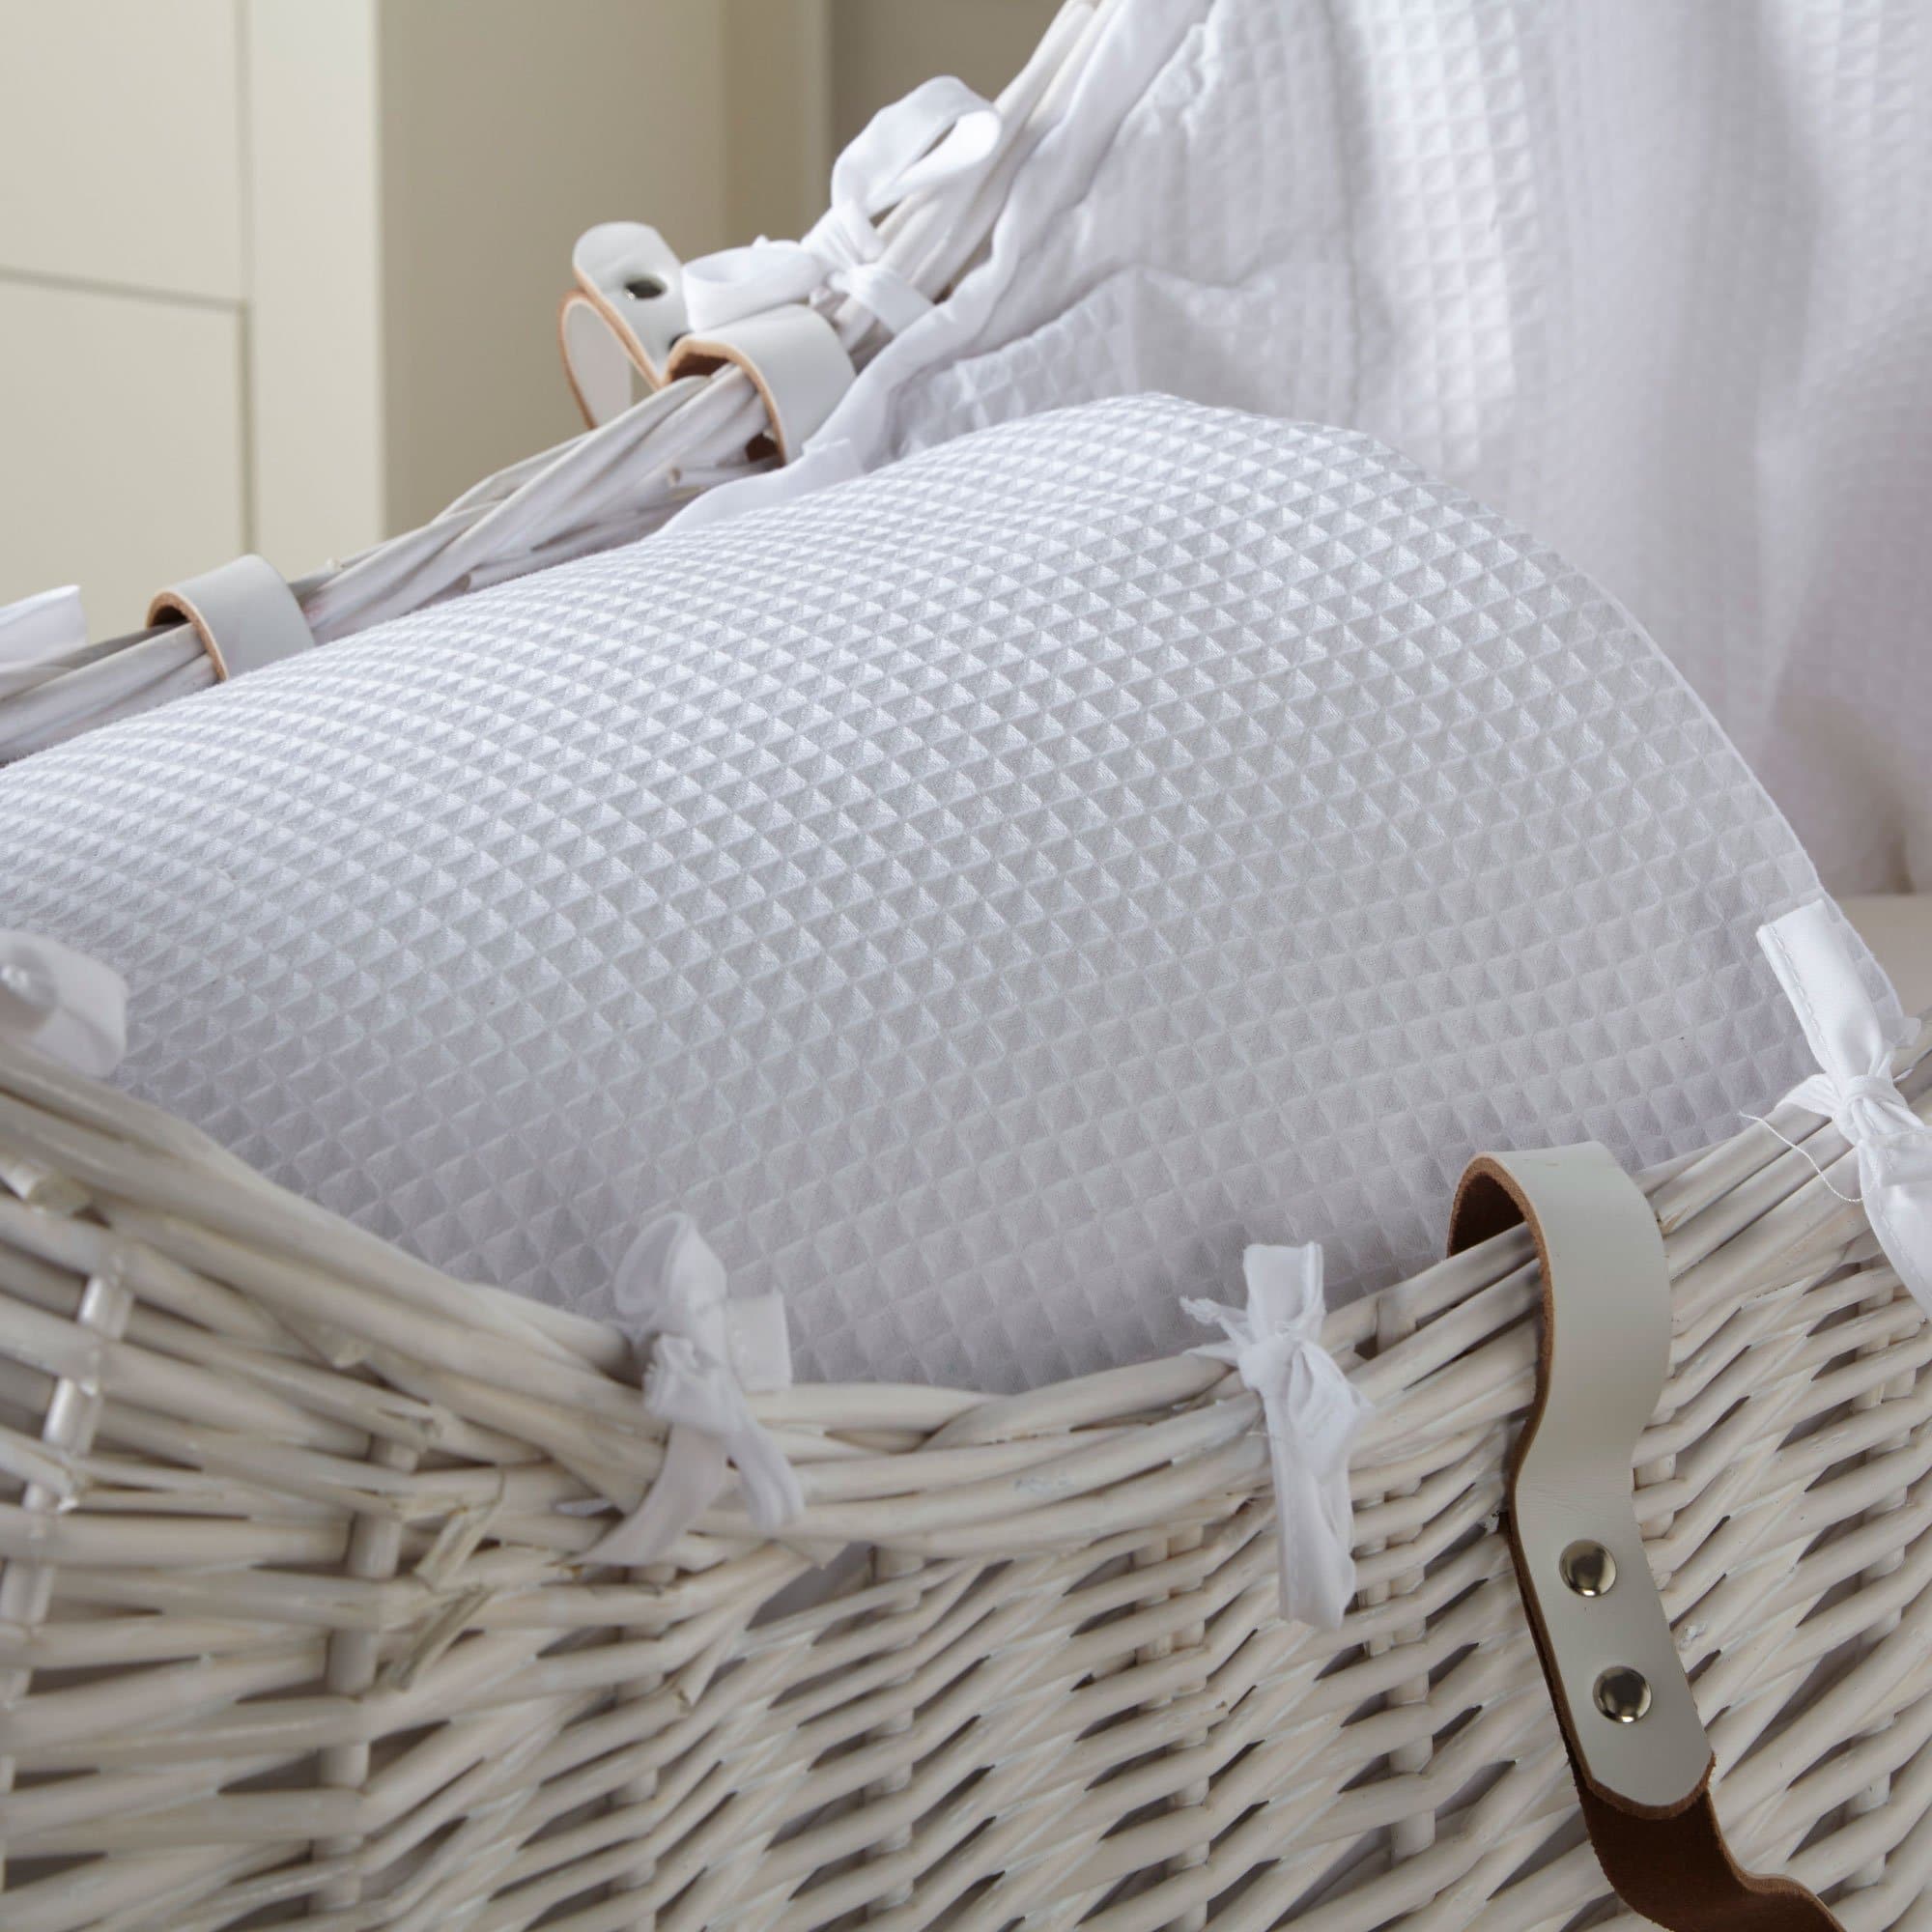 Wicker Pod Baby Deluxe Moses Basket -  | For Your Little One